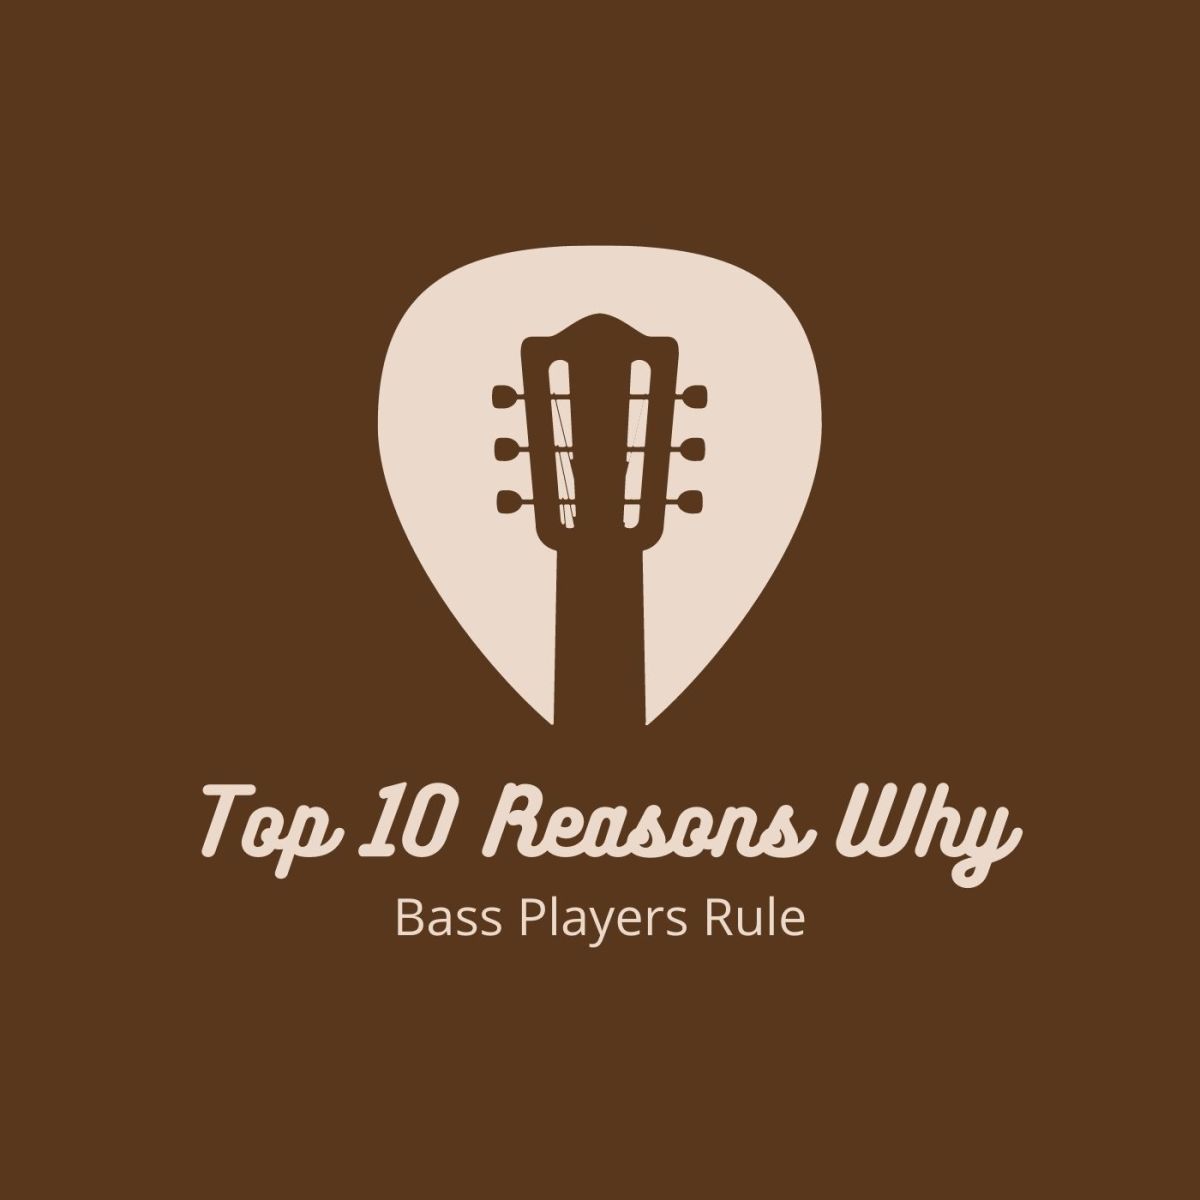 Bass players rule and here's why!